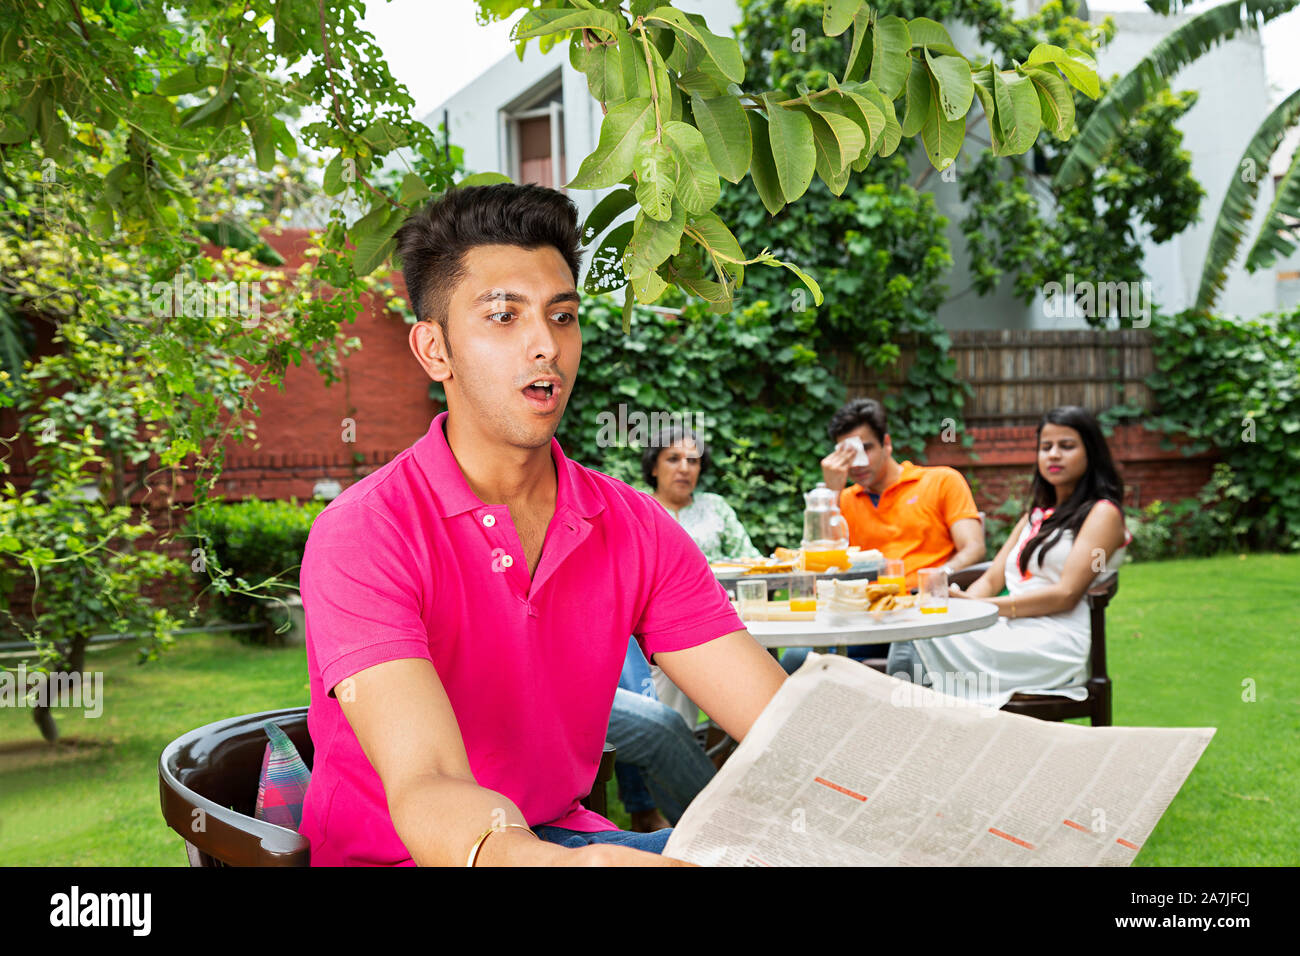 Shocked male Sitting-on-chair reading badnews on-newspaper with family in-the-background at courtyard of their house Stock Photo